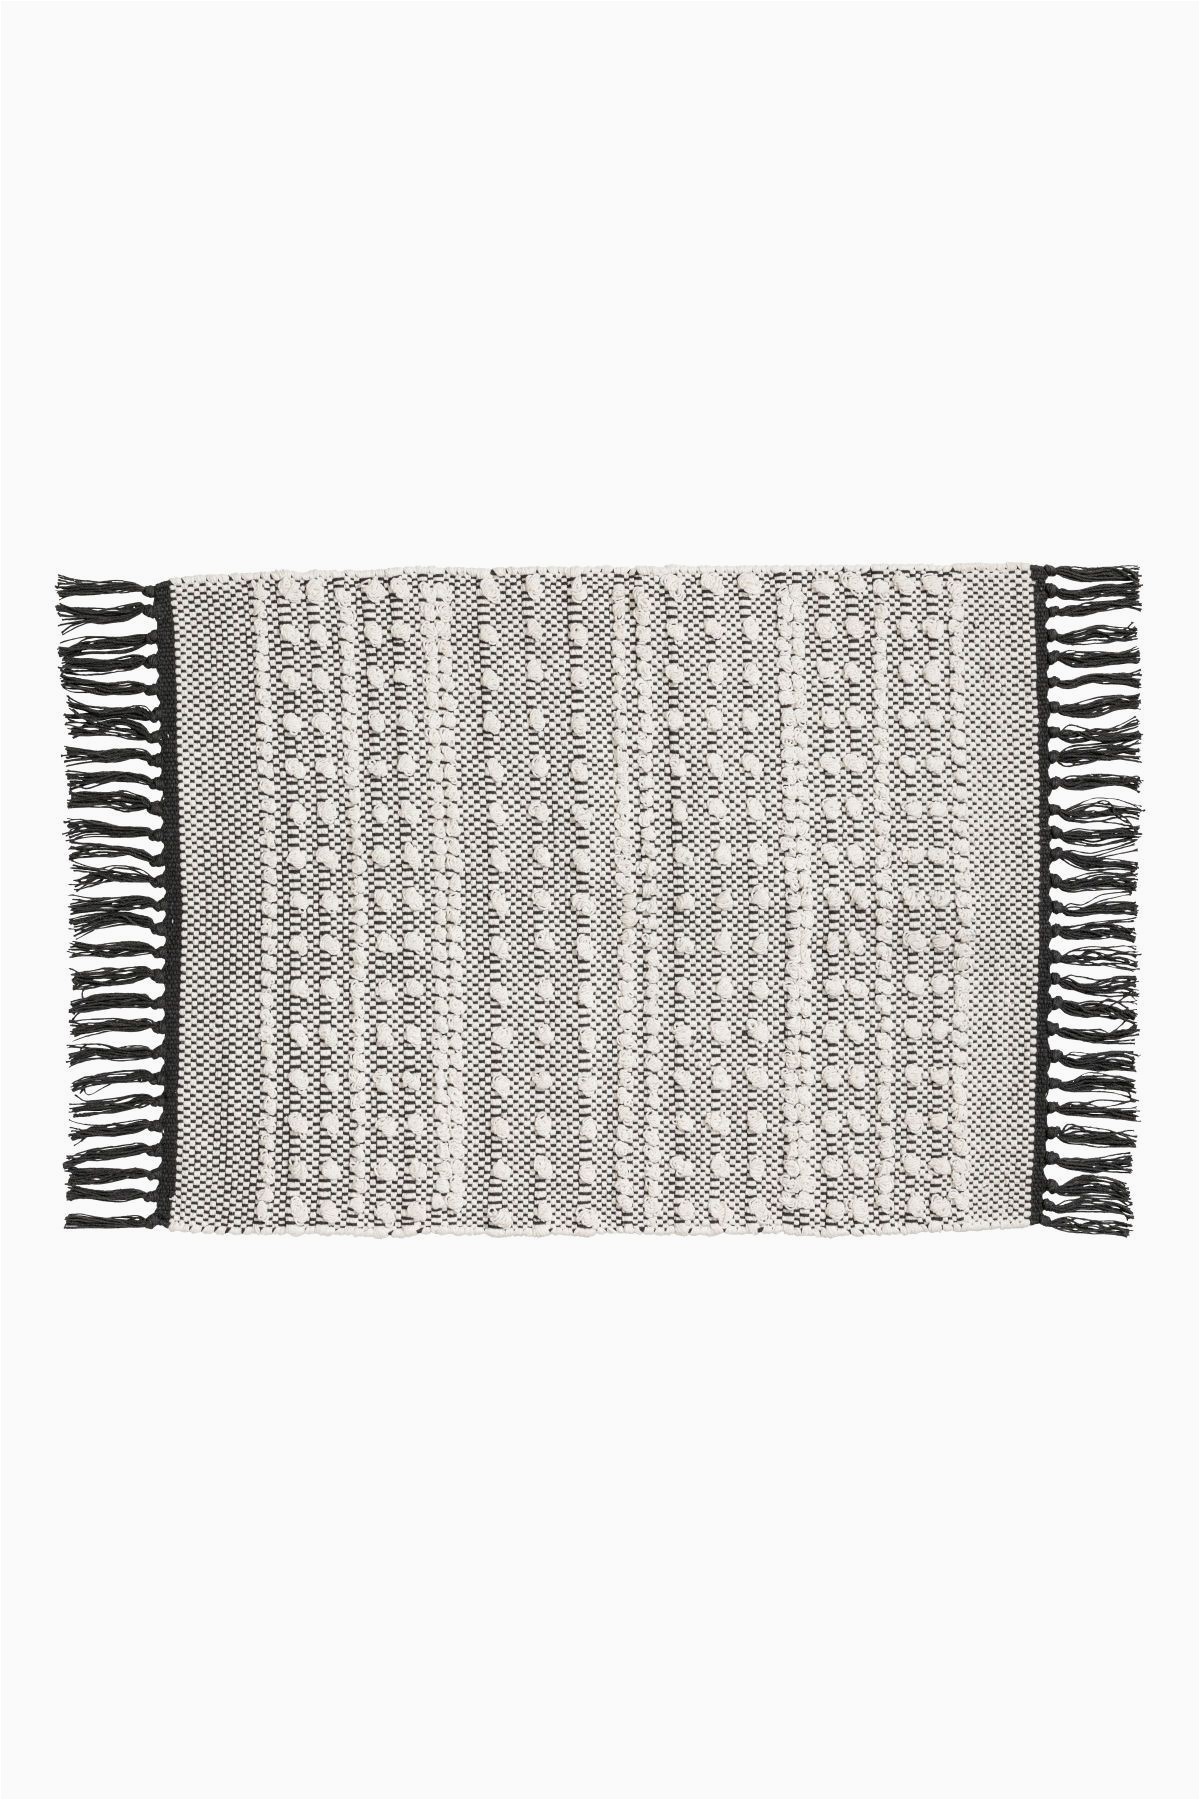 Black and White Striped Bathroom Rug Set White Charcoal Gray Bath Mat In Jacquard Weave Cotton